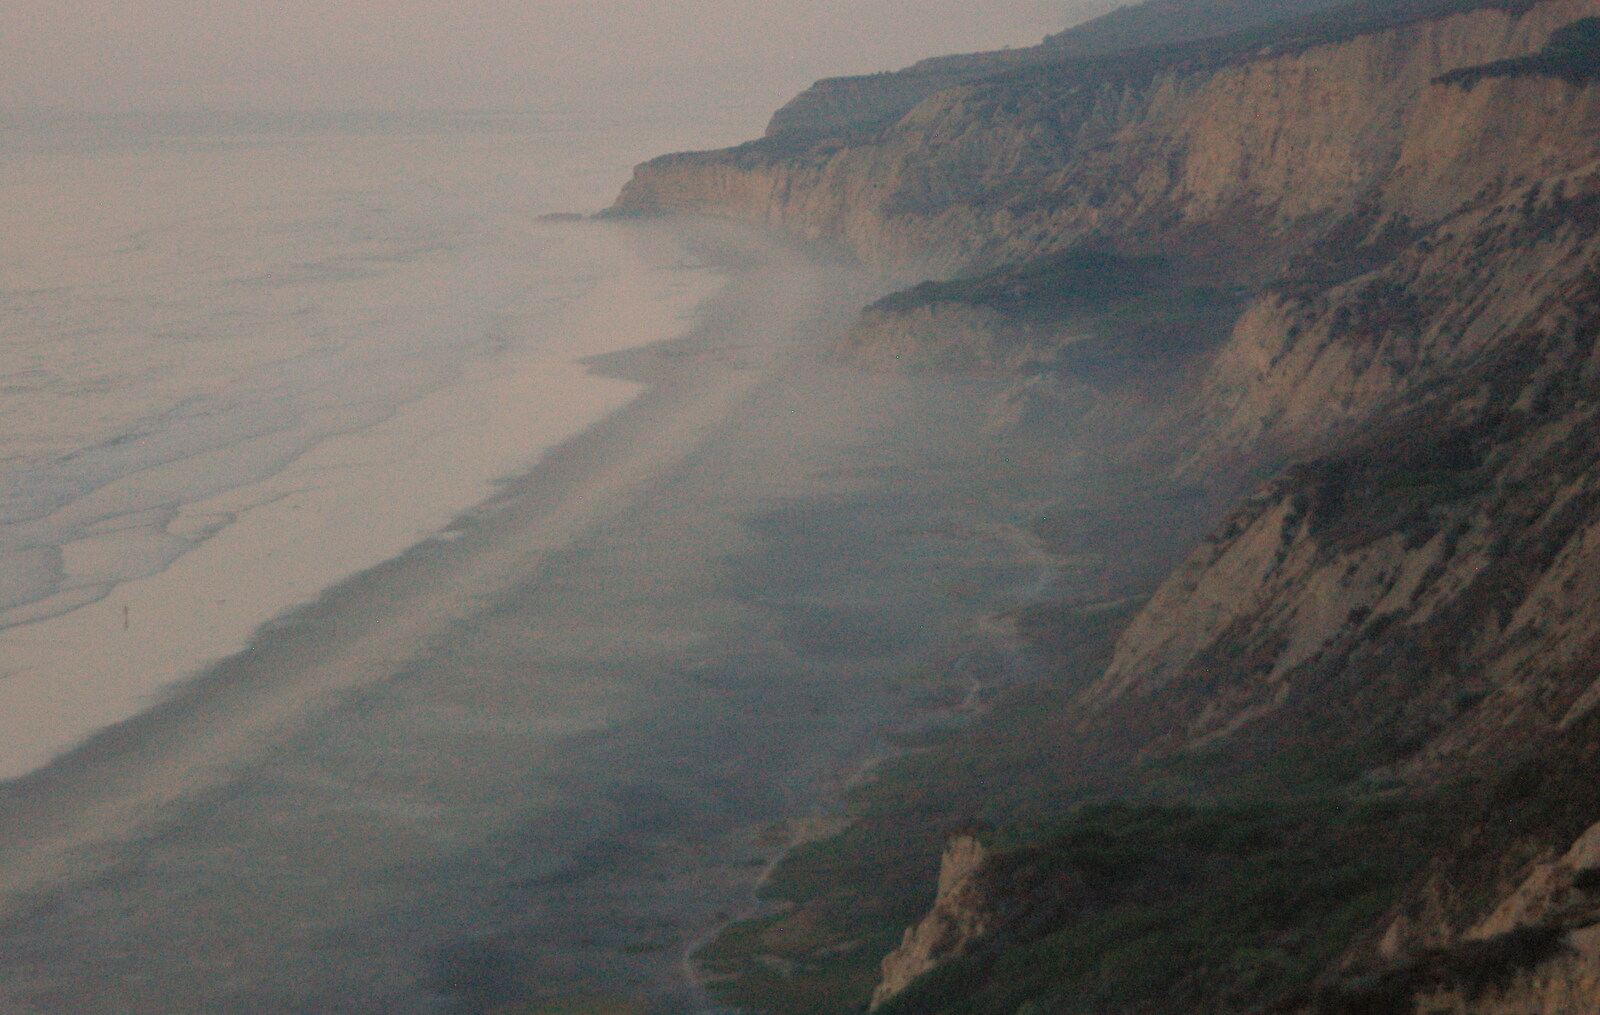 Mist rolls in off the sea from San Diego Four, California, US - 22nd September 2005